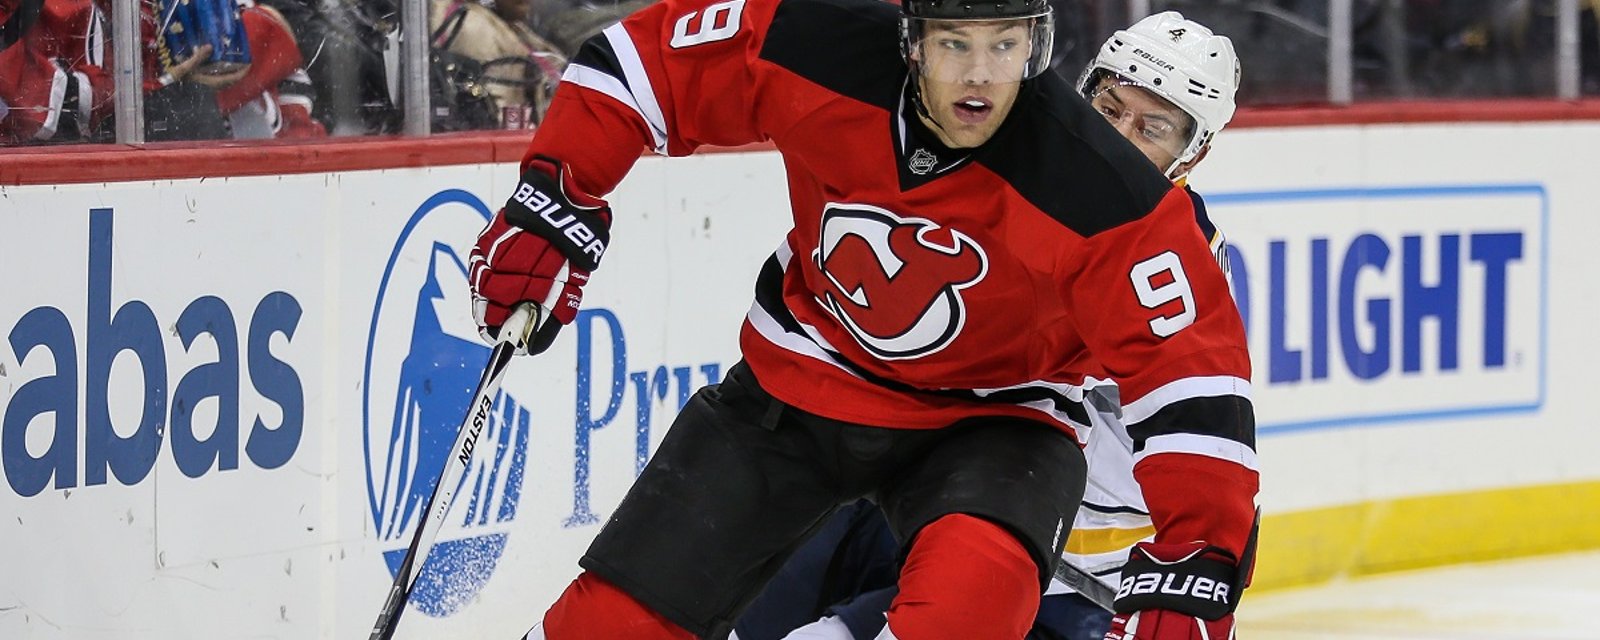 Taylor Hall set to make near miraculous return from a major injury.